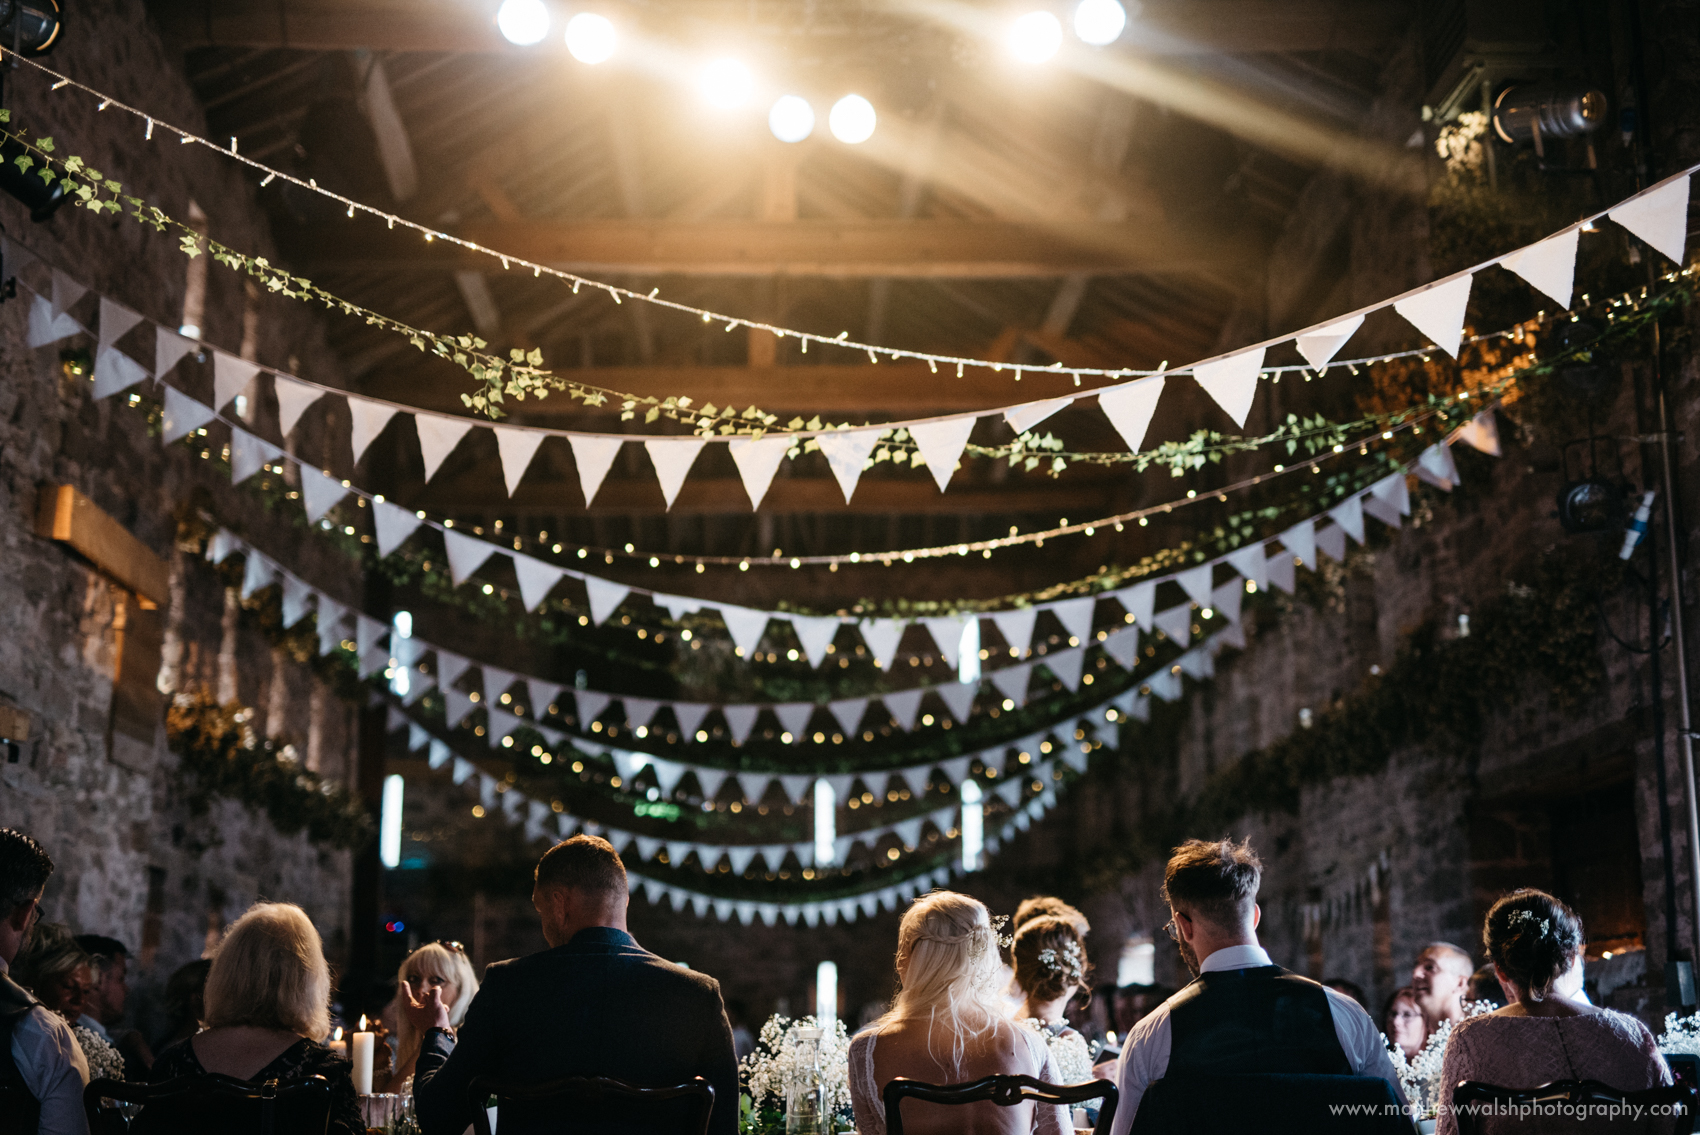 All seated in the main barn, lit by the fairy lights and spot lighting above